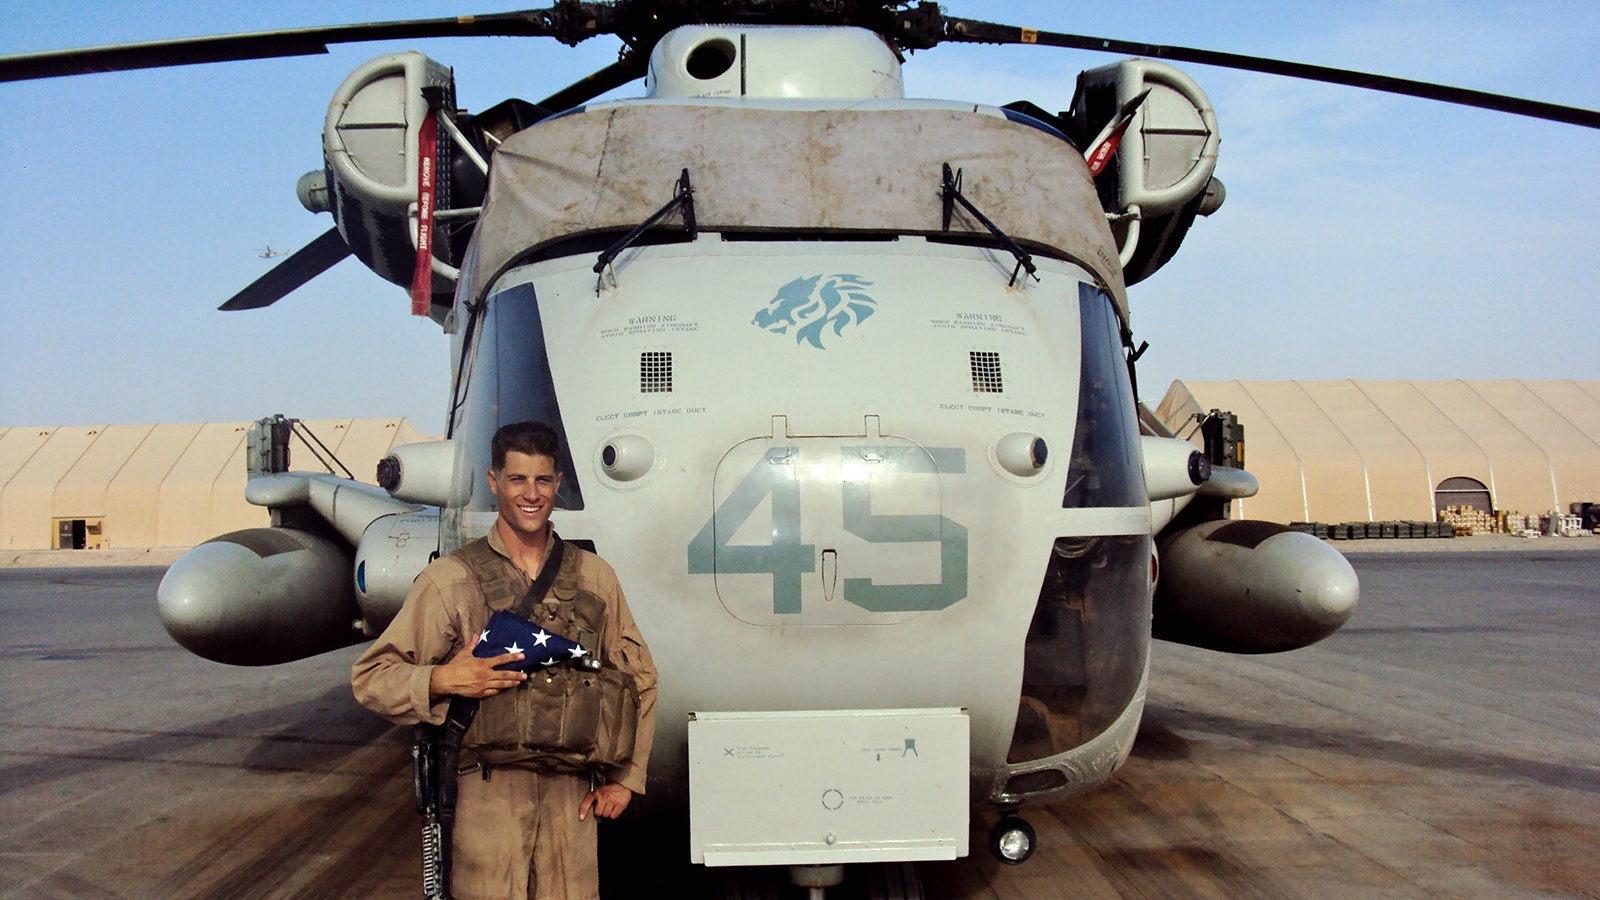 Brandon Busch with the helicopter he flew in Afghanistan as a U.S. Marine.